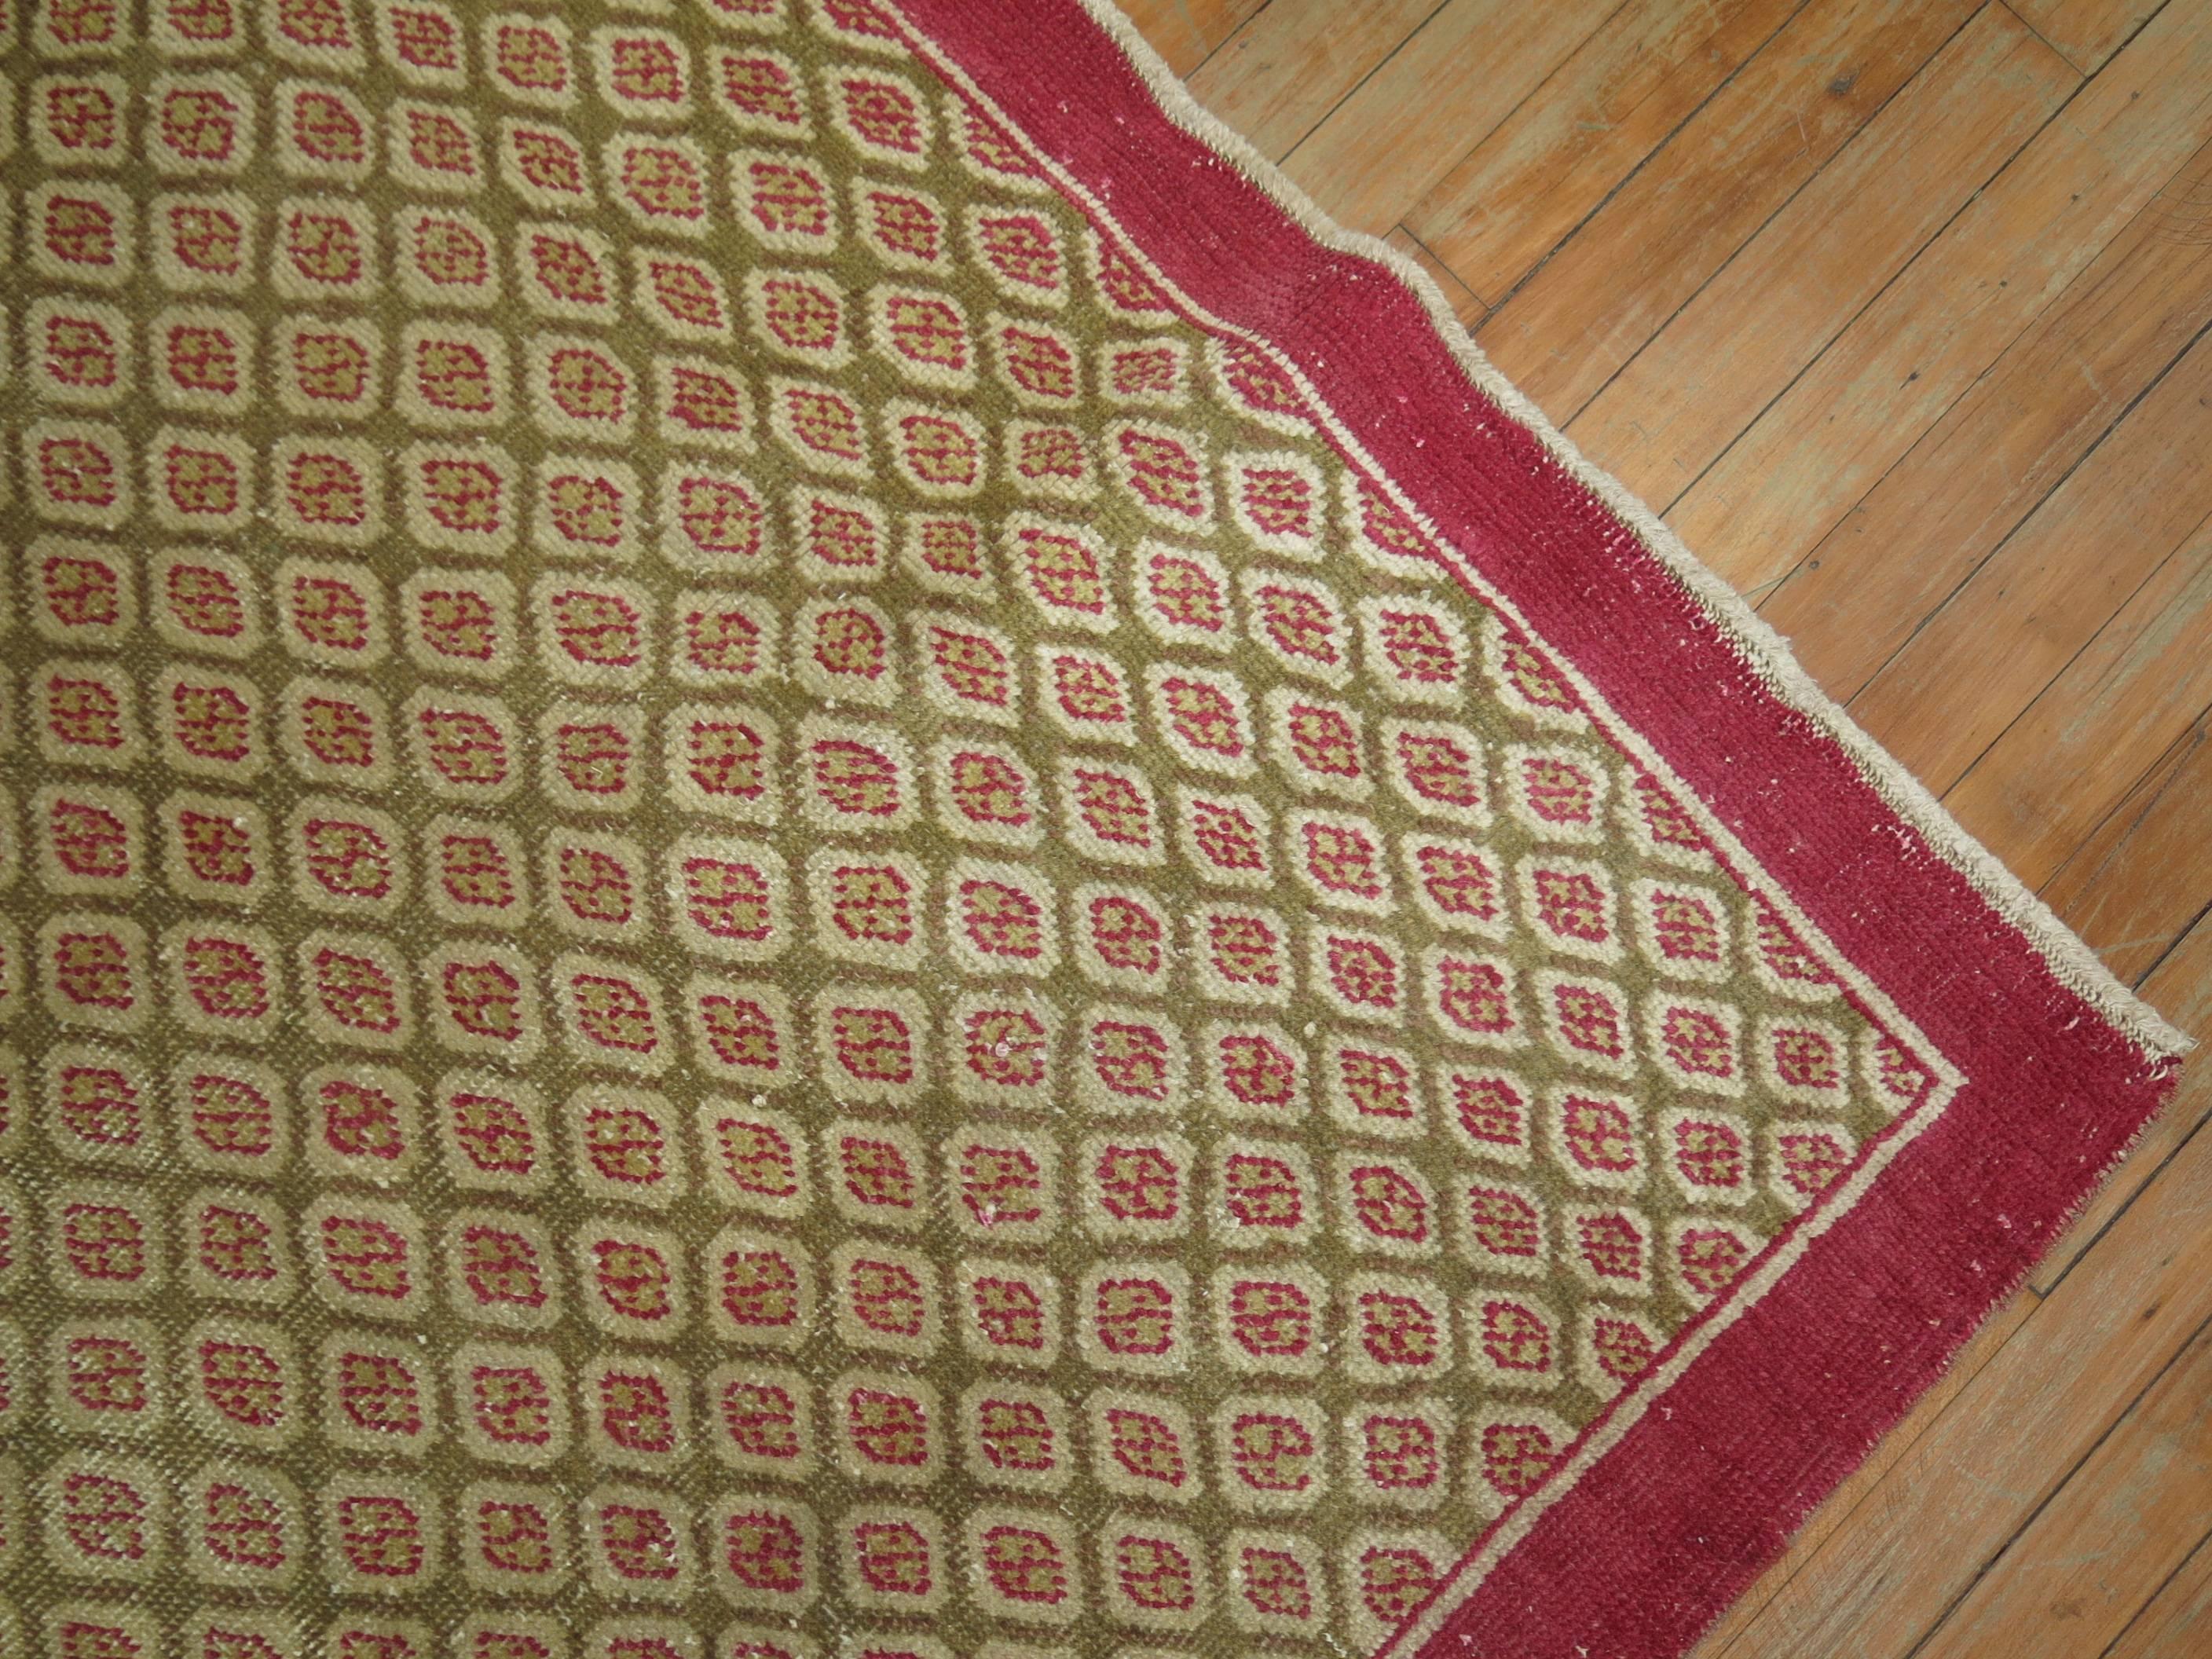 One of a kind vintage Turkish rug with a tight repetitive pattern in raspberries on a camel brown field.

4'1'' x 6'7''